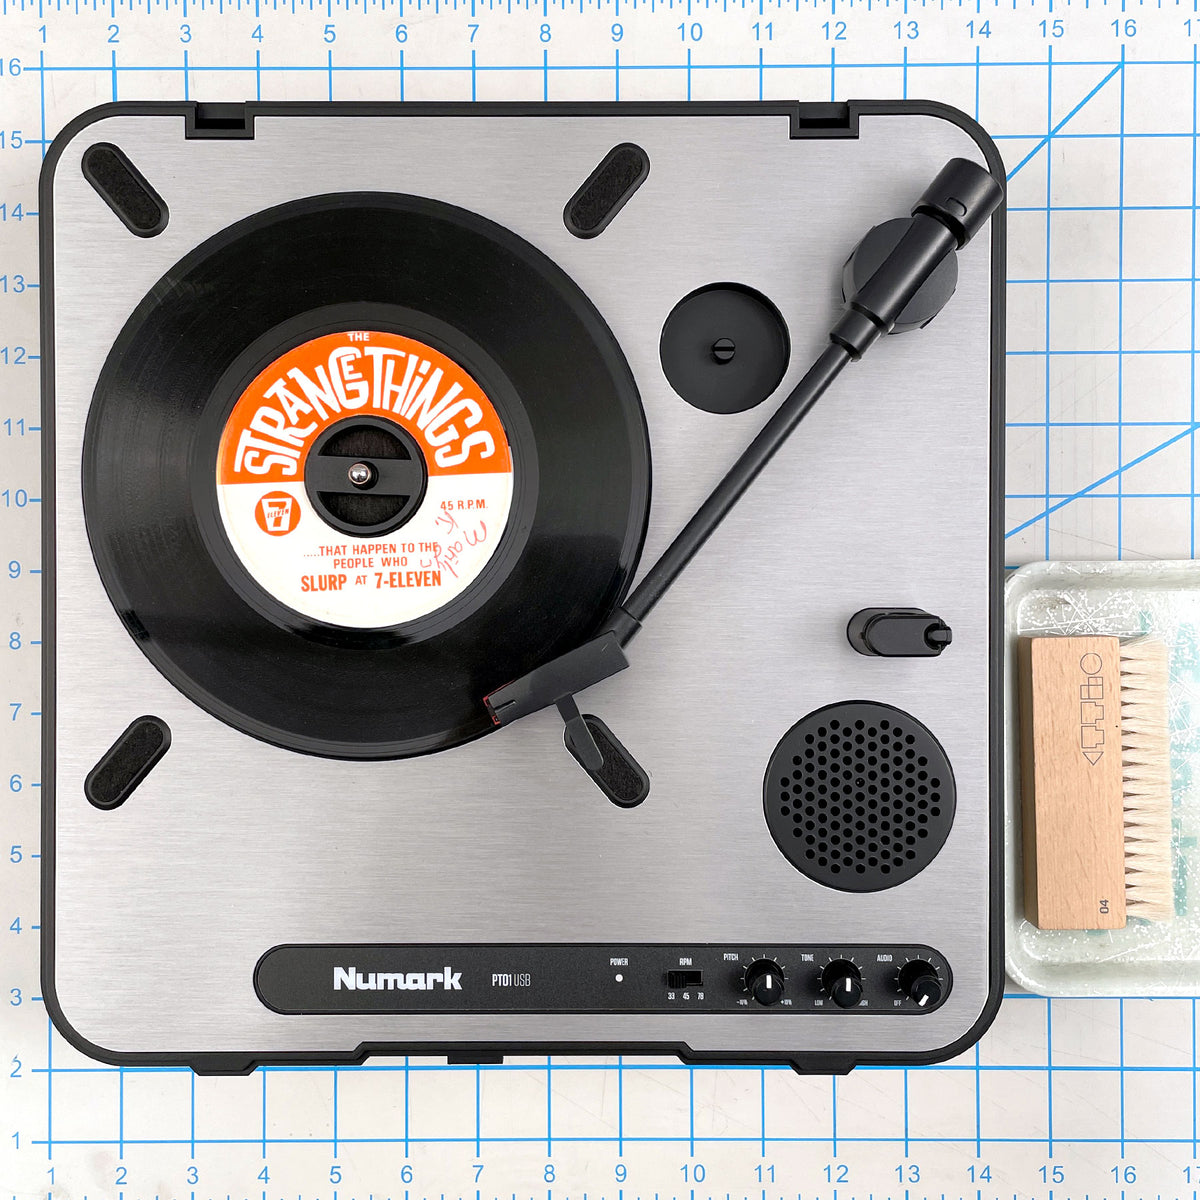  Numark PT01USB - Portable Vinyl Record Player, USB Turntable  With Built In Speaker, Power via Battery or AC Adapter, Three Speed RPM  Selection for Hi-Fi, Outdoors listening, DJ, Recording : Everything